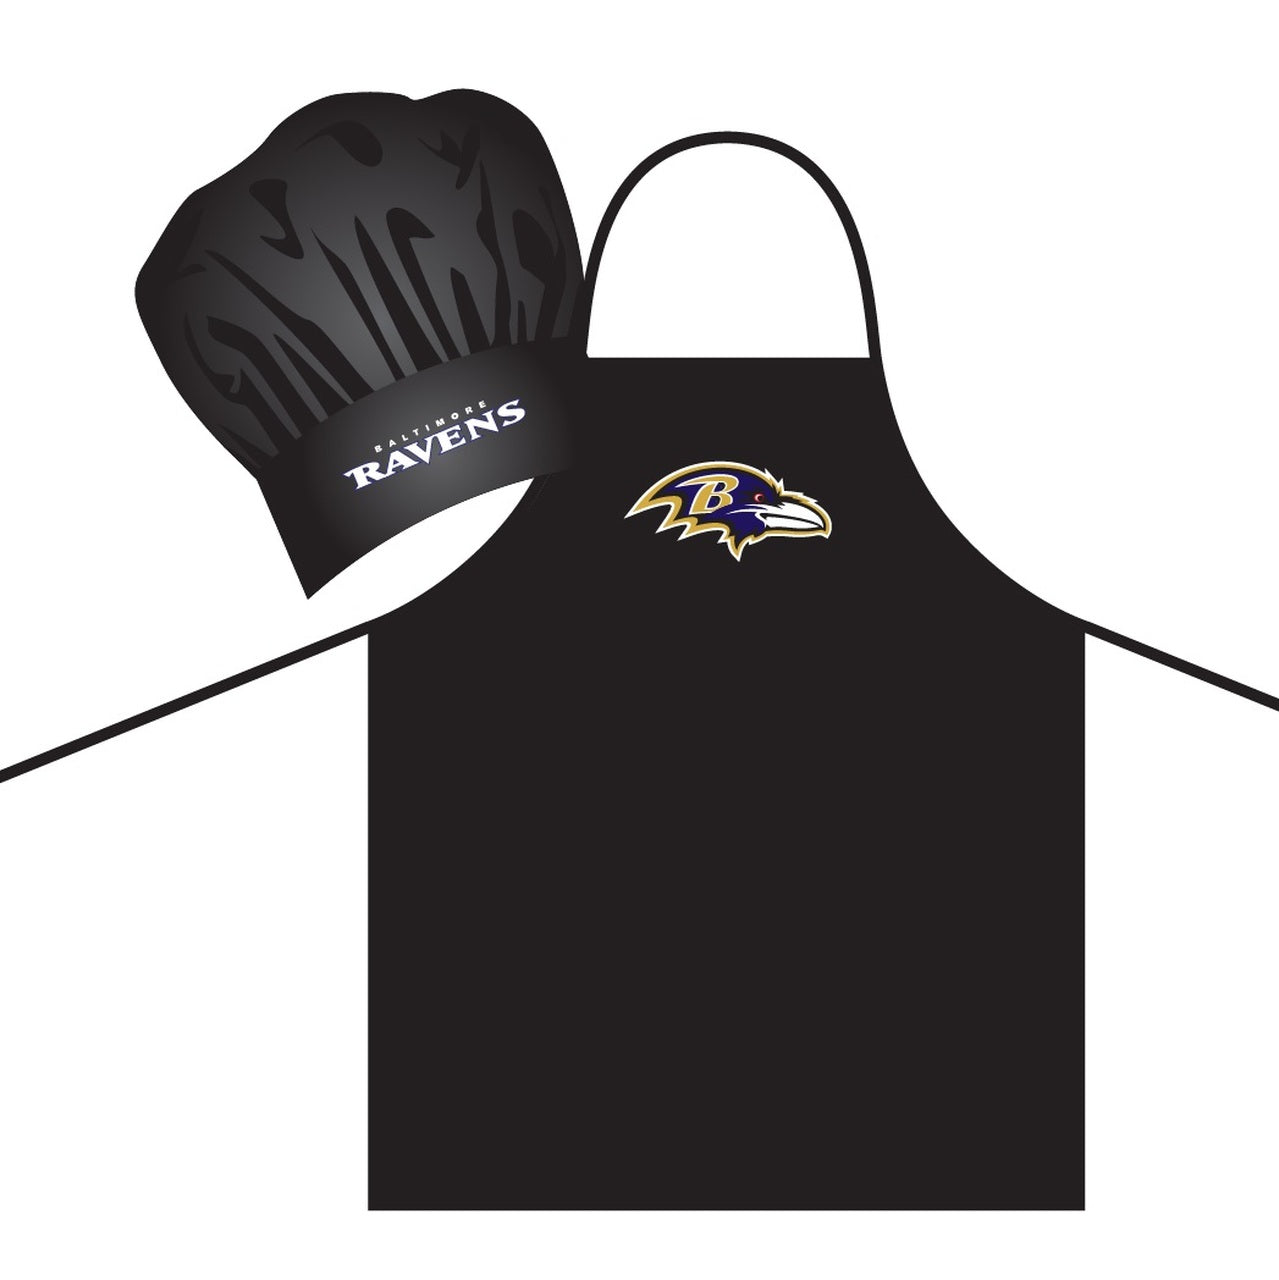 Baltimore Ravens Apron and Chef Hat Set by PSG